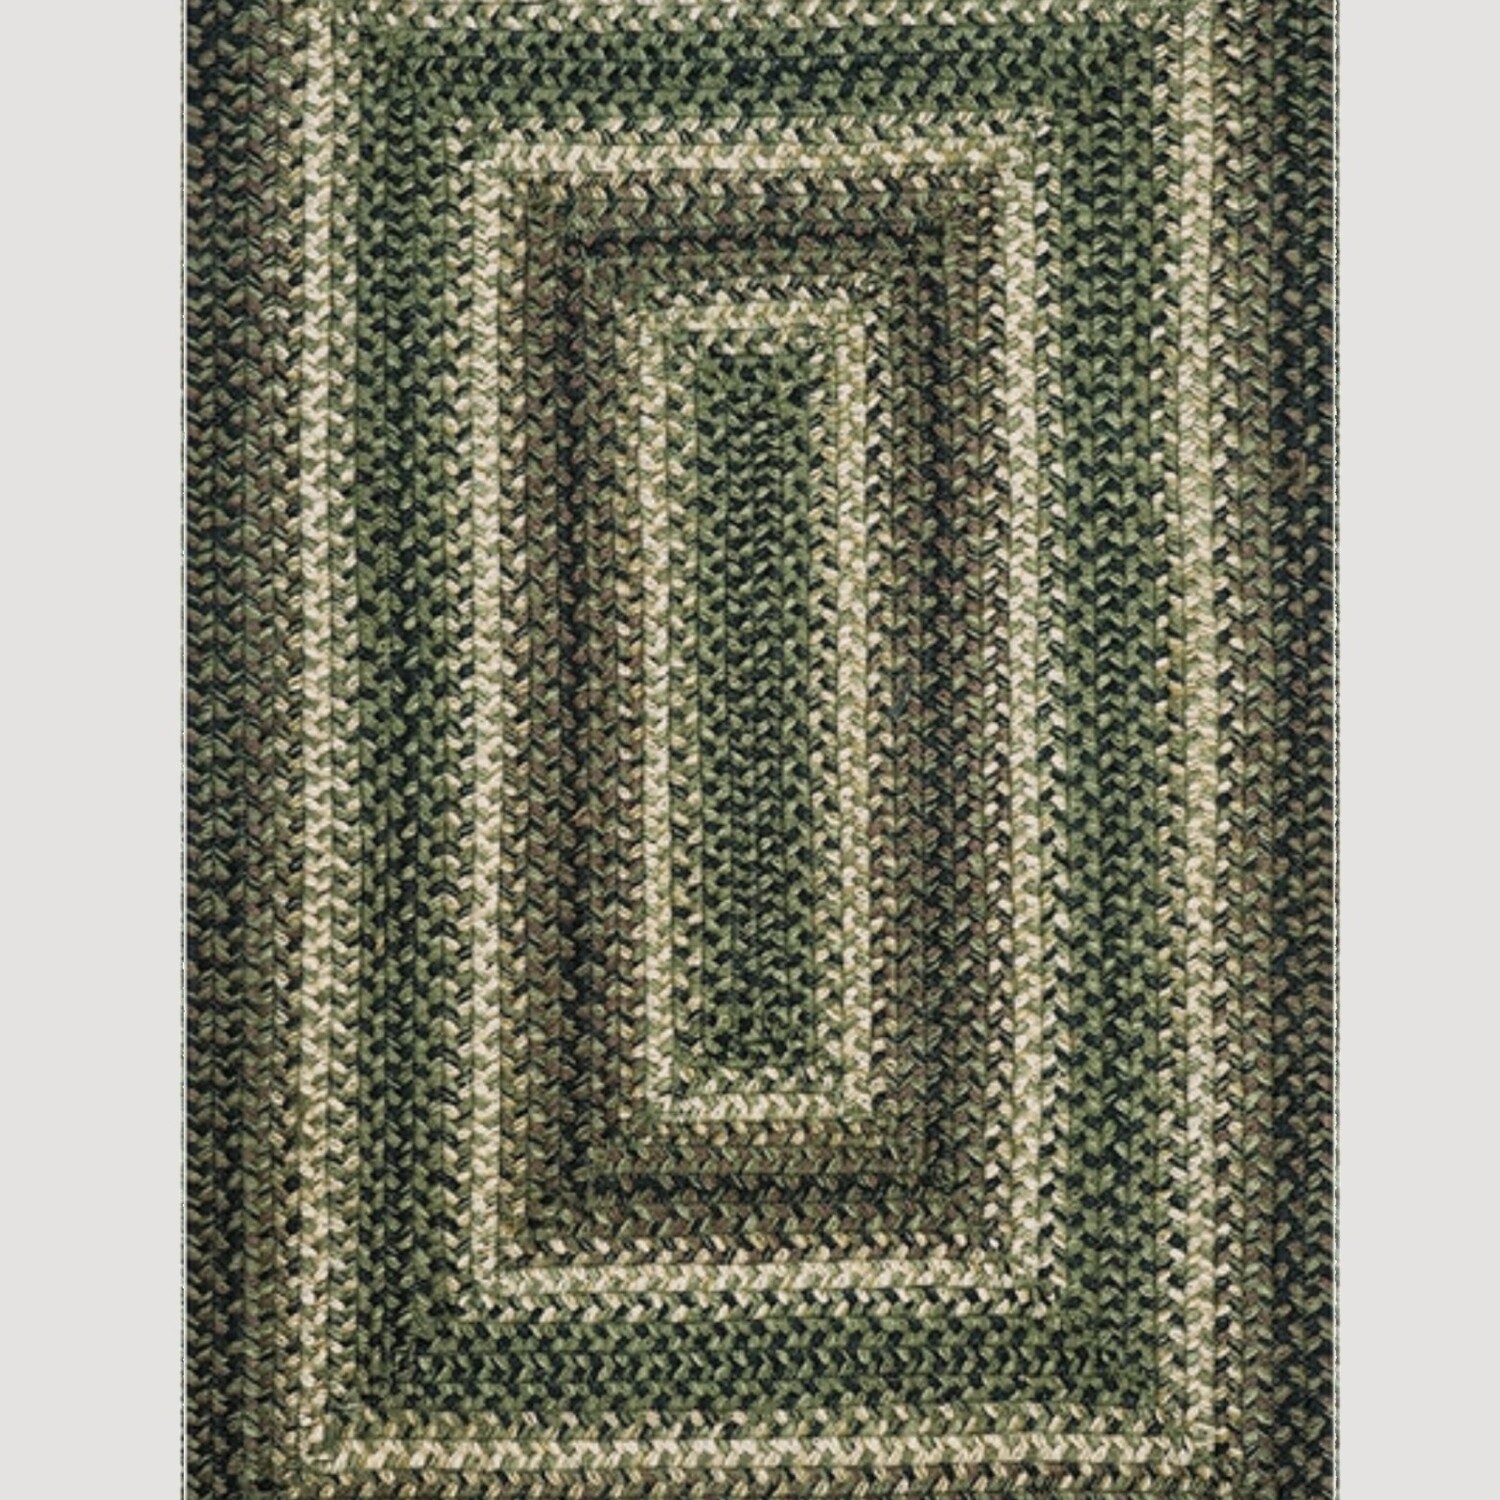 Harvest Braided Jute Oval Rug by Homespice